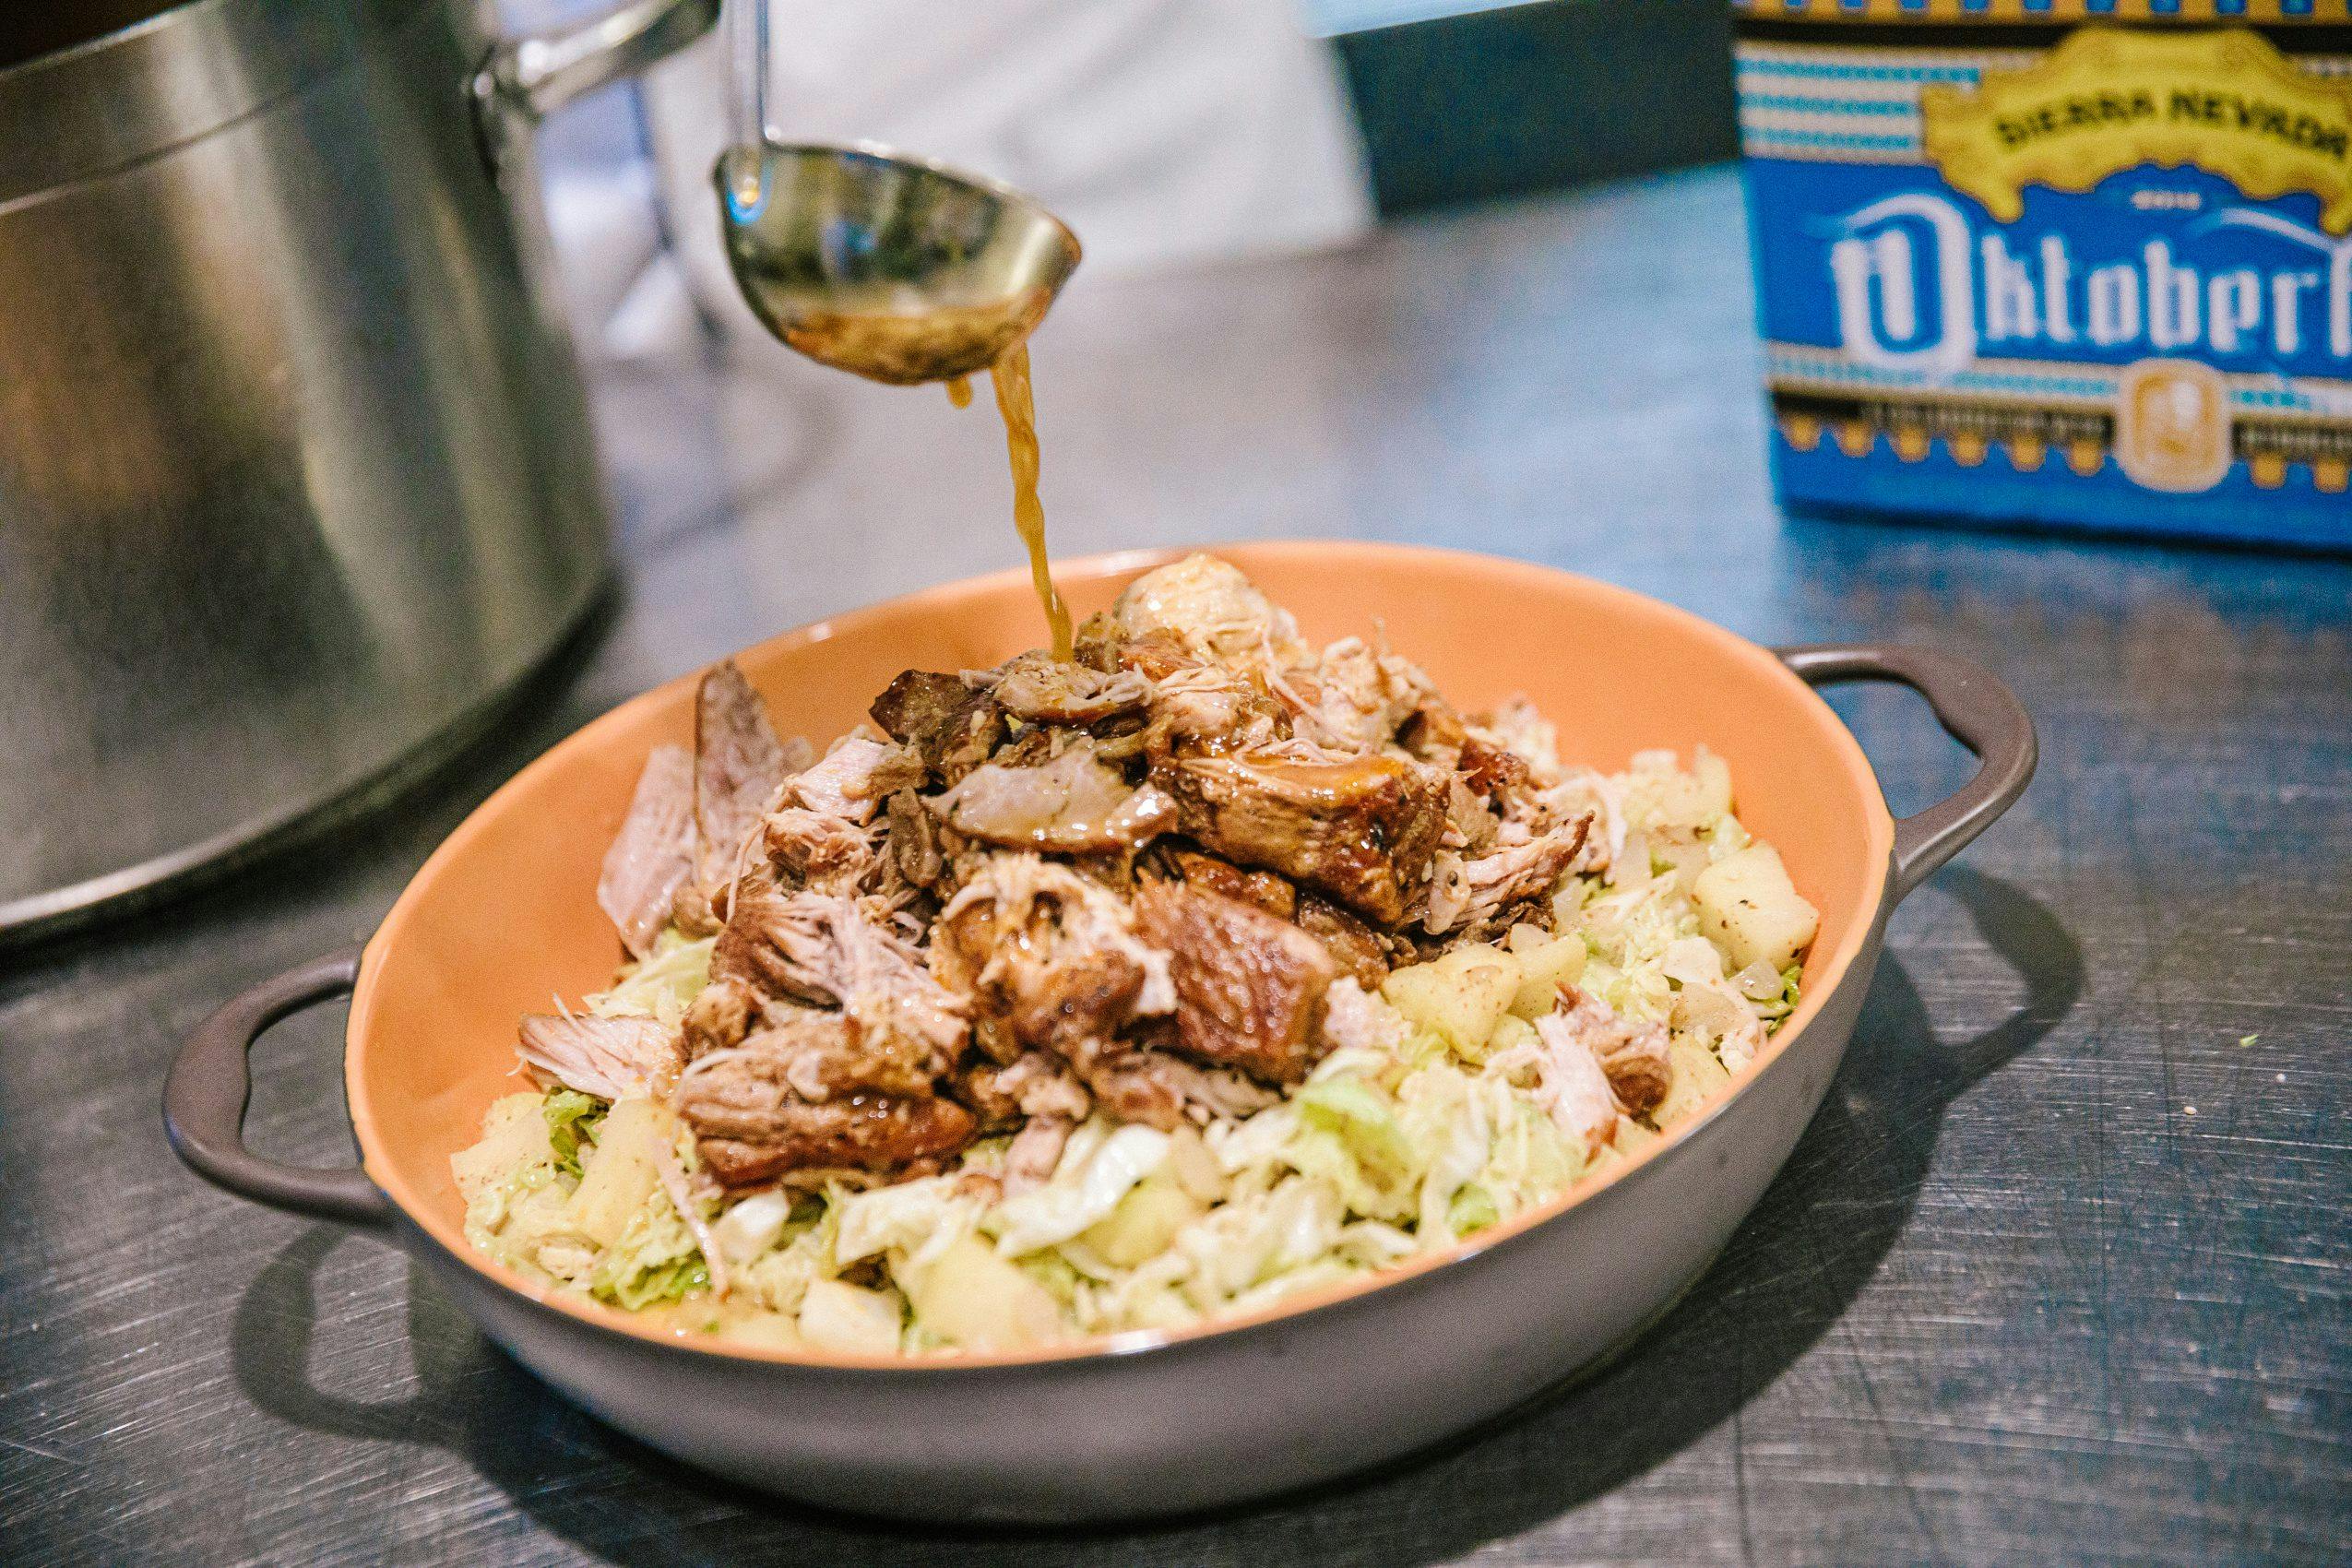 Chef holding a plate of braised pork and cabbage next to Oktoberfest beer